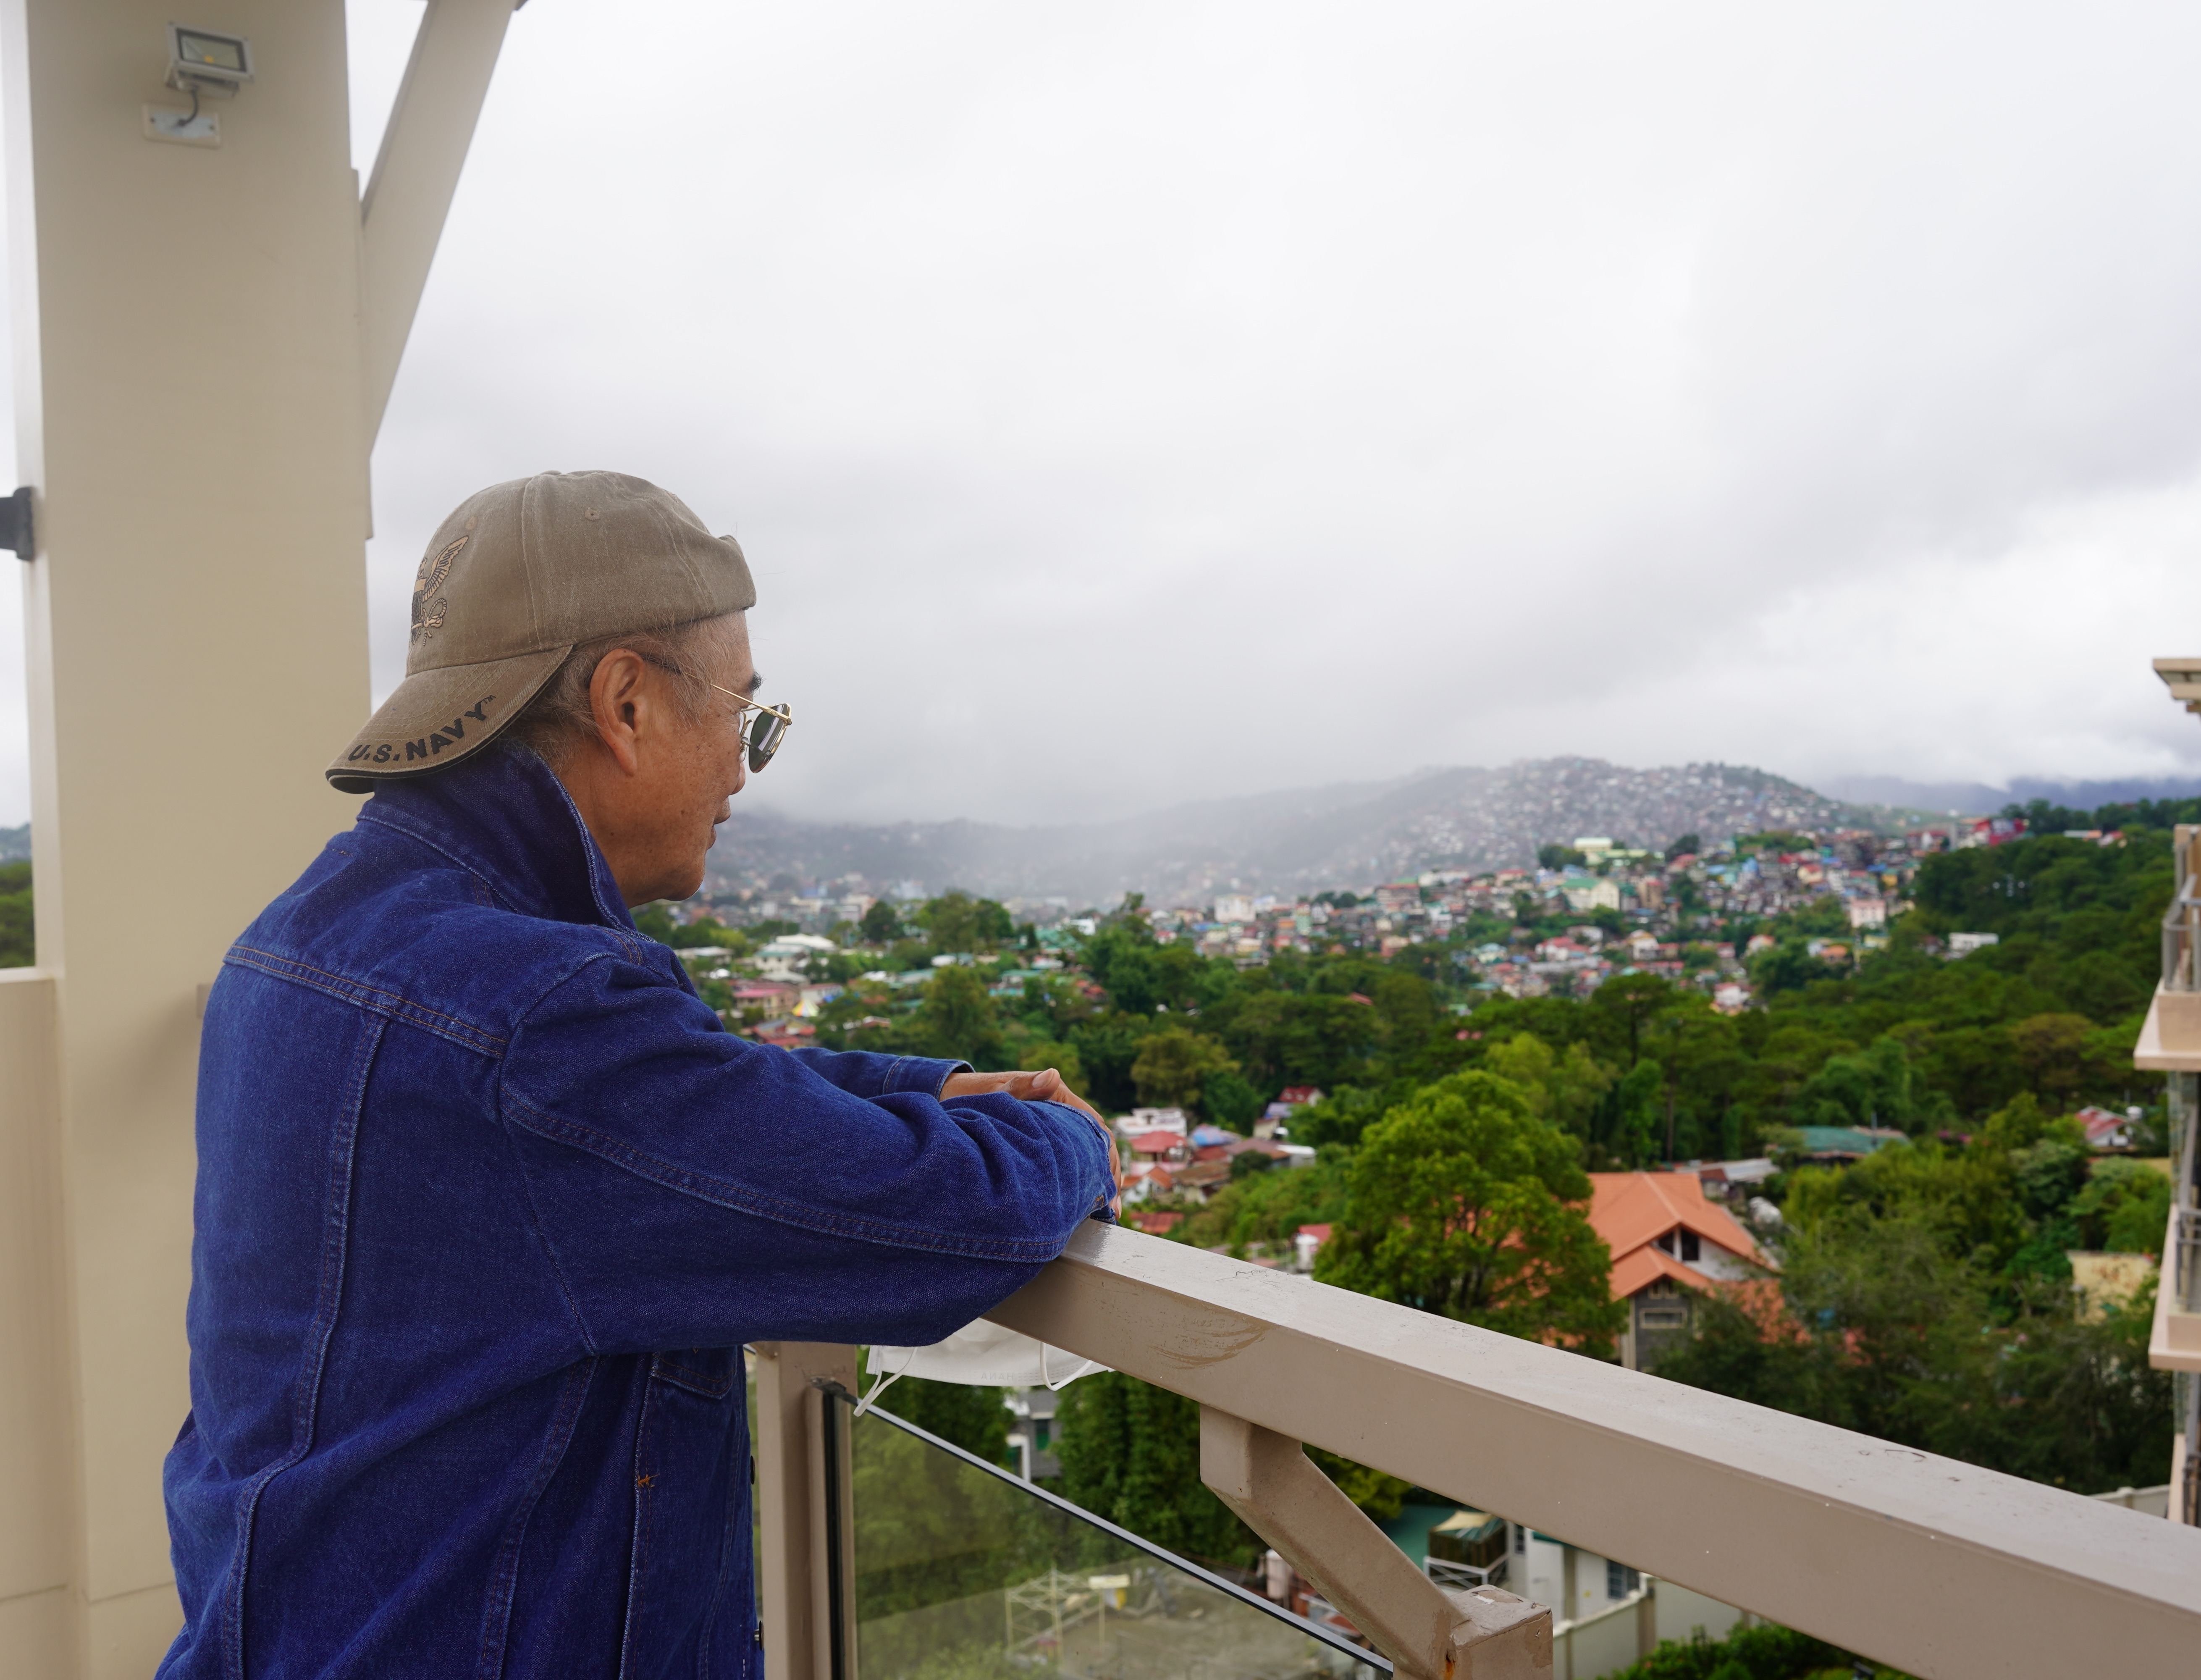 ideal-baguio-vacation-home-delights-balikbayan-retiree-1667966421595